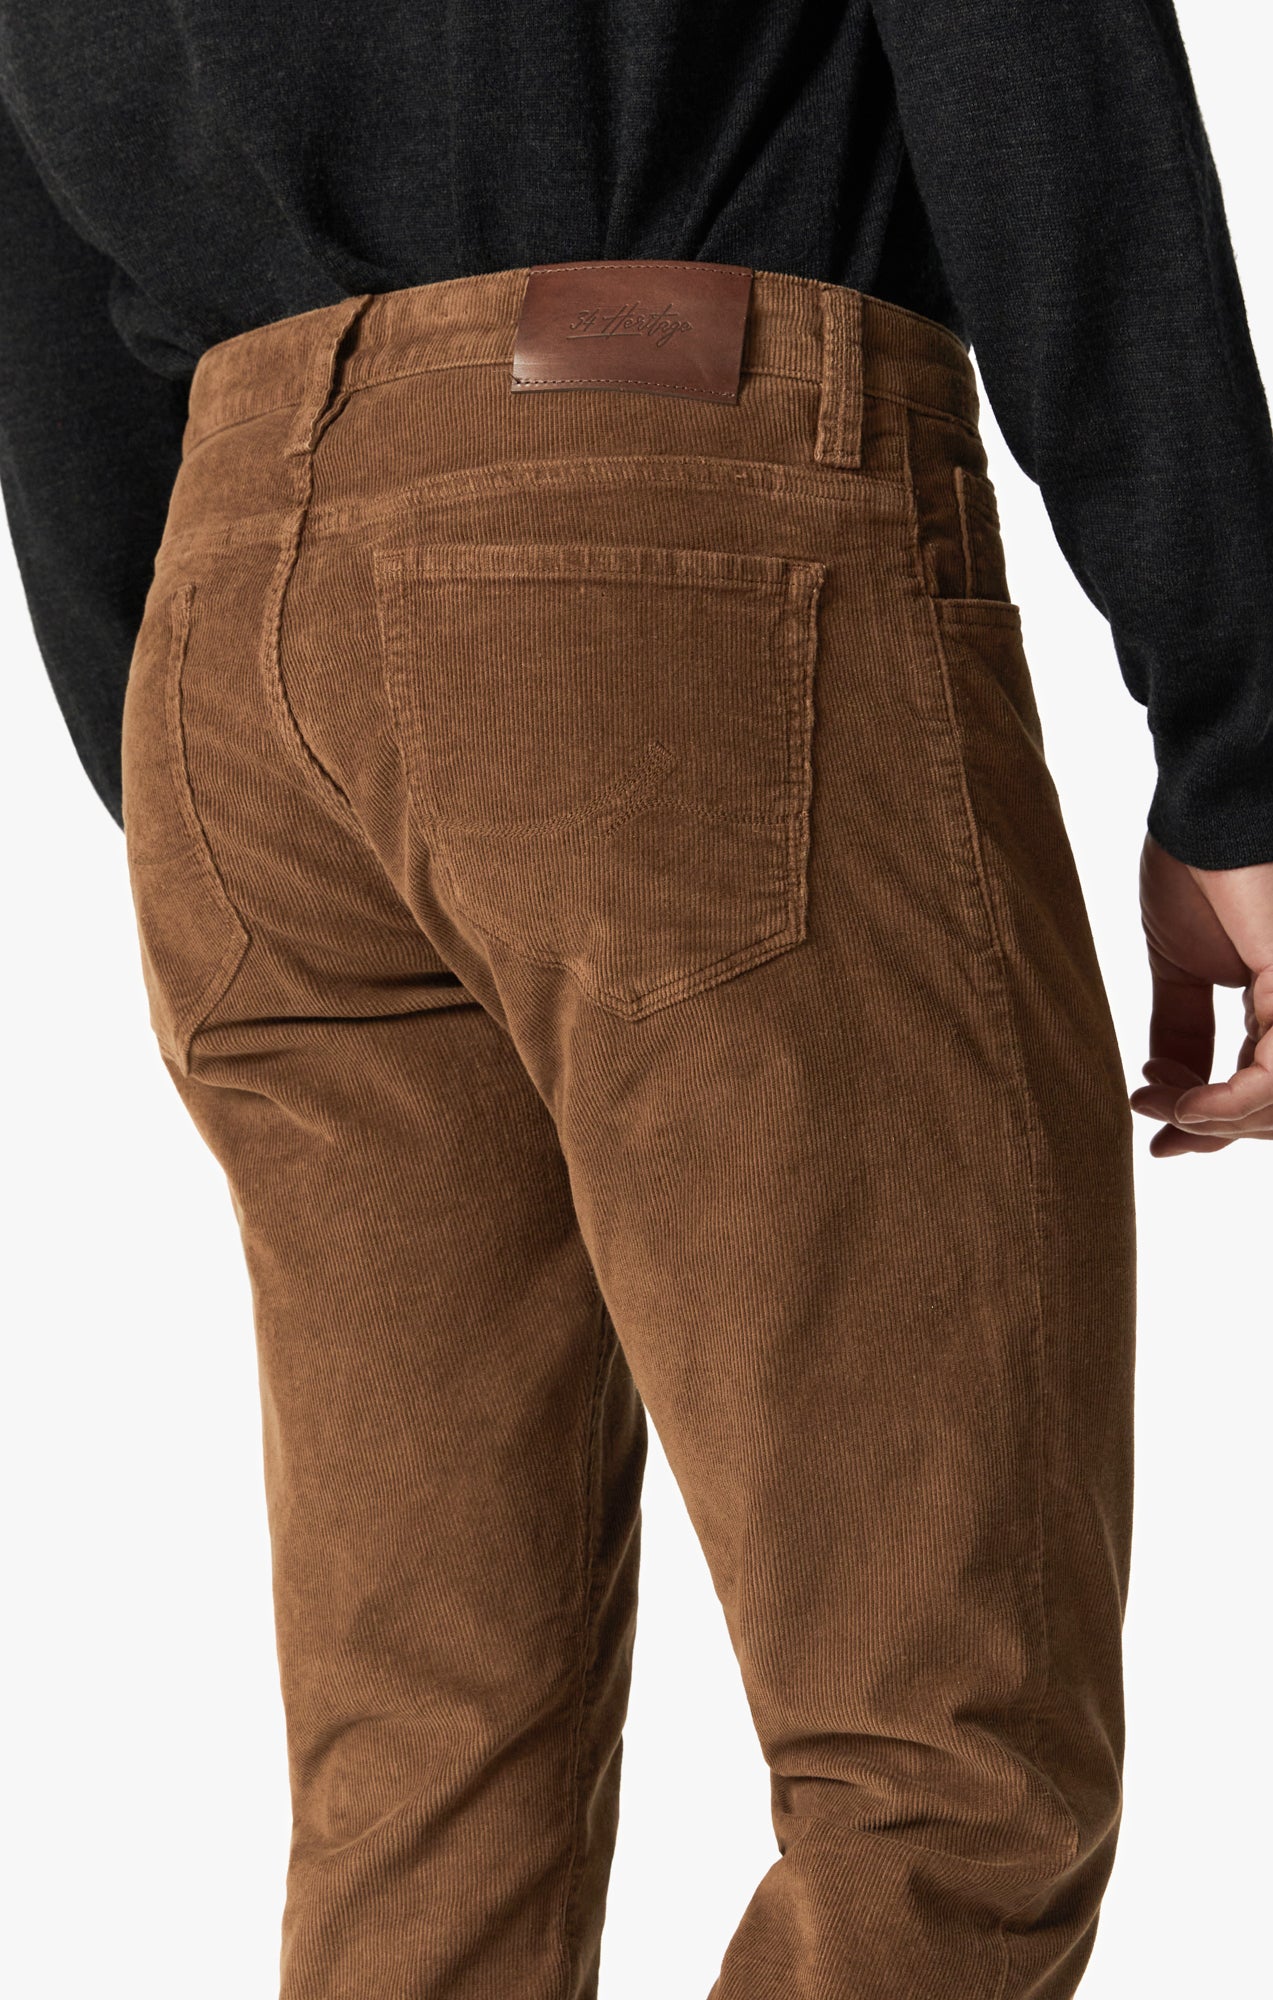 Cool Tapered Leg Pants In Cognac Cord Image 5